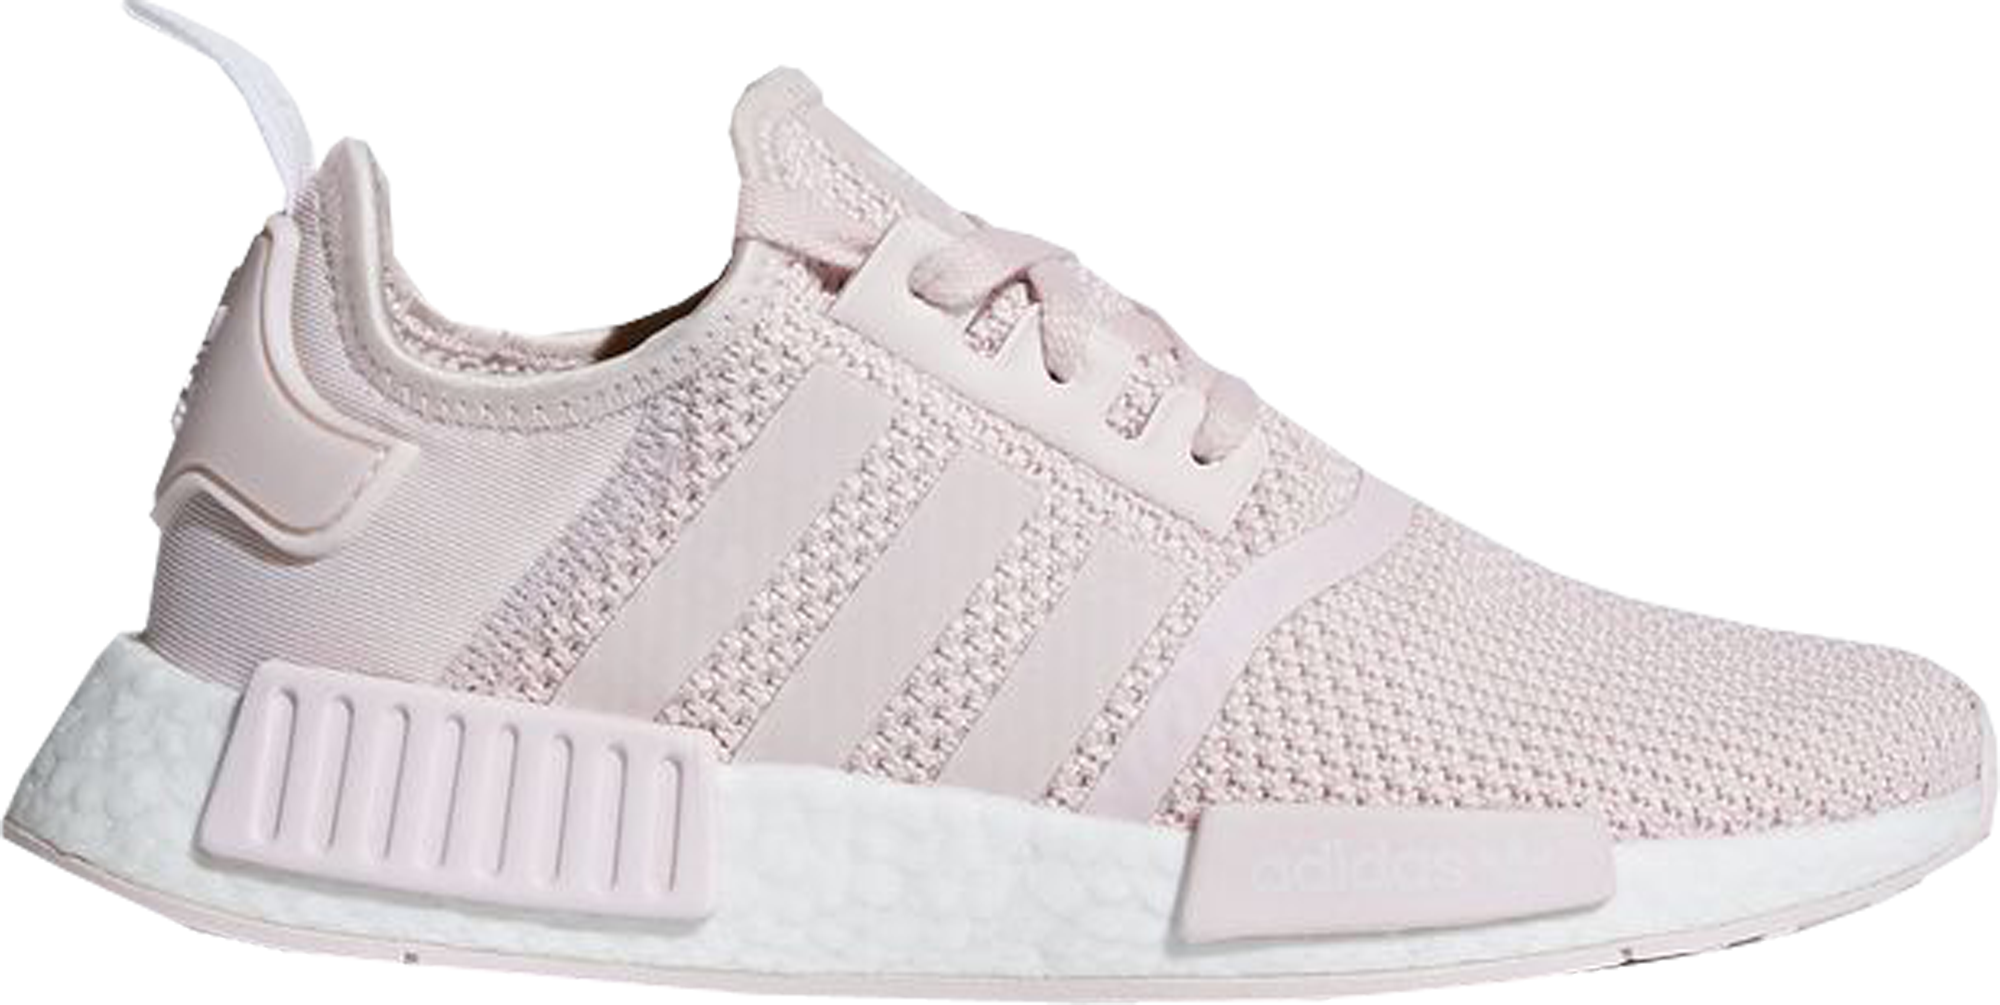 nmd r1 orchid tint white